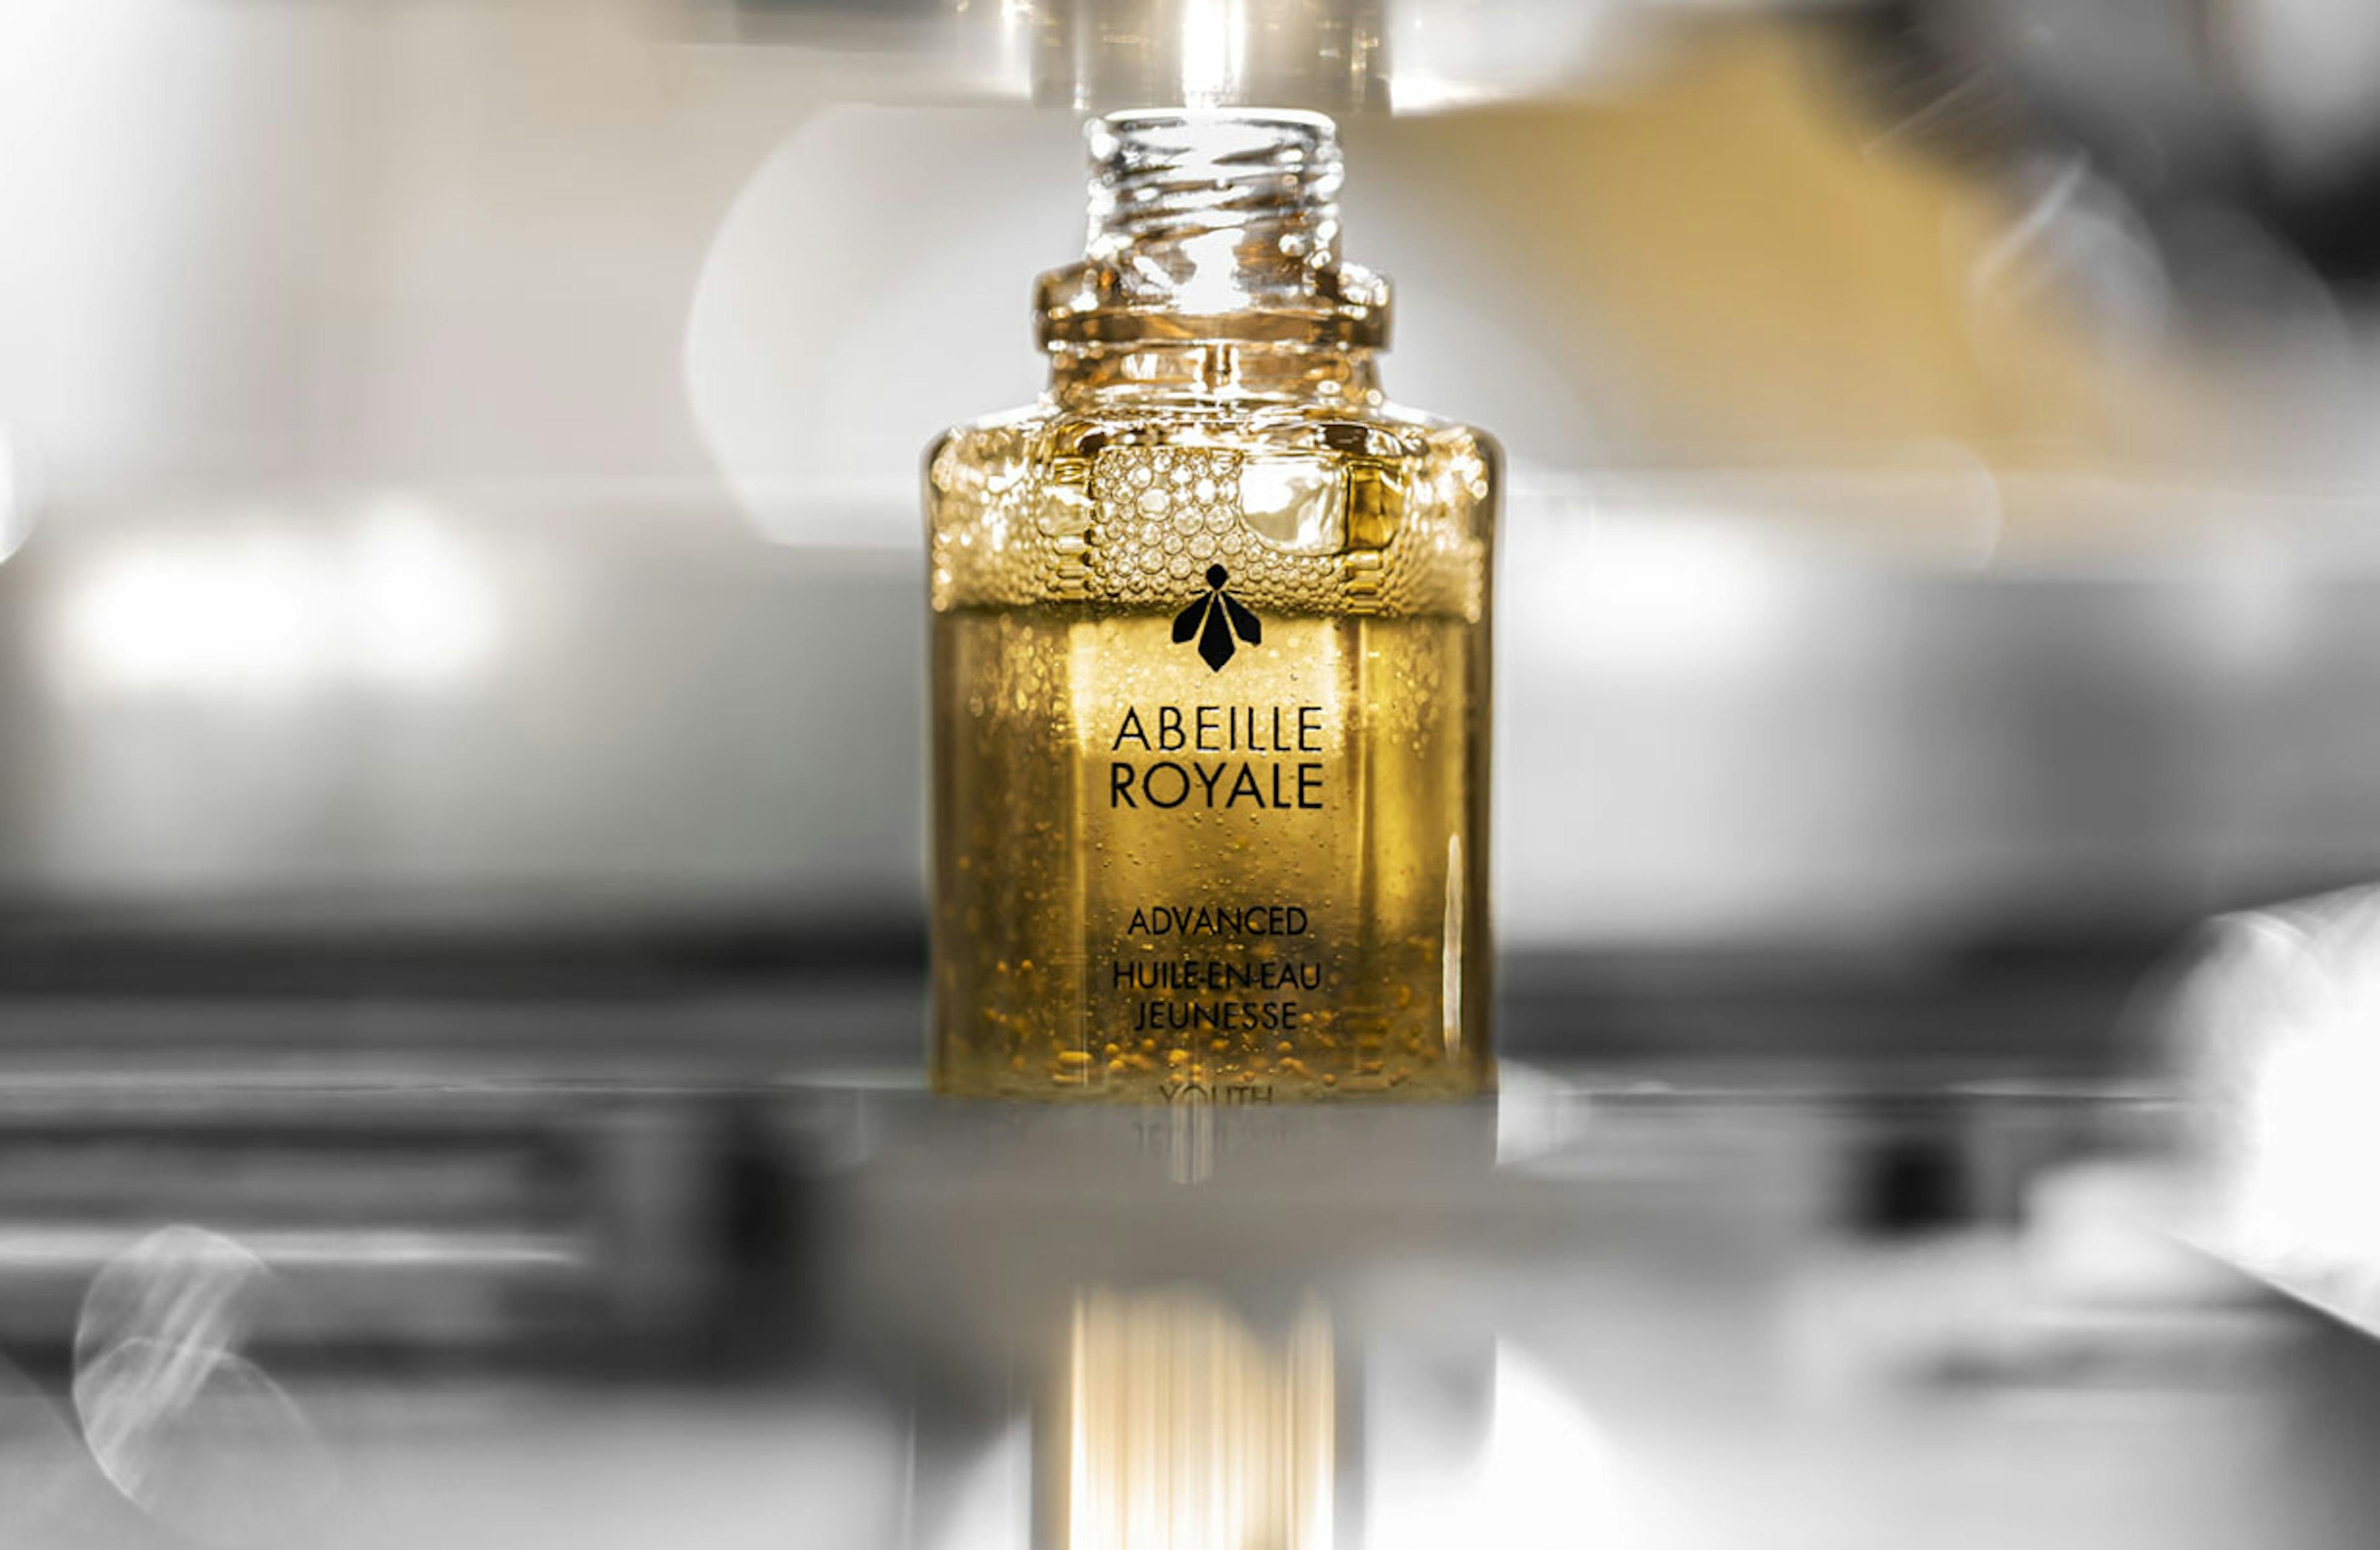 Abeille Royale Watery Oil at La Ruche site in Chartres, France.